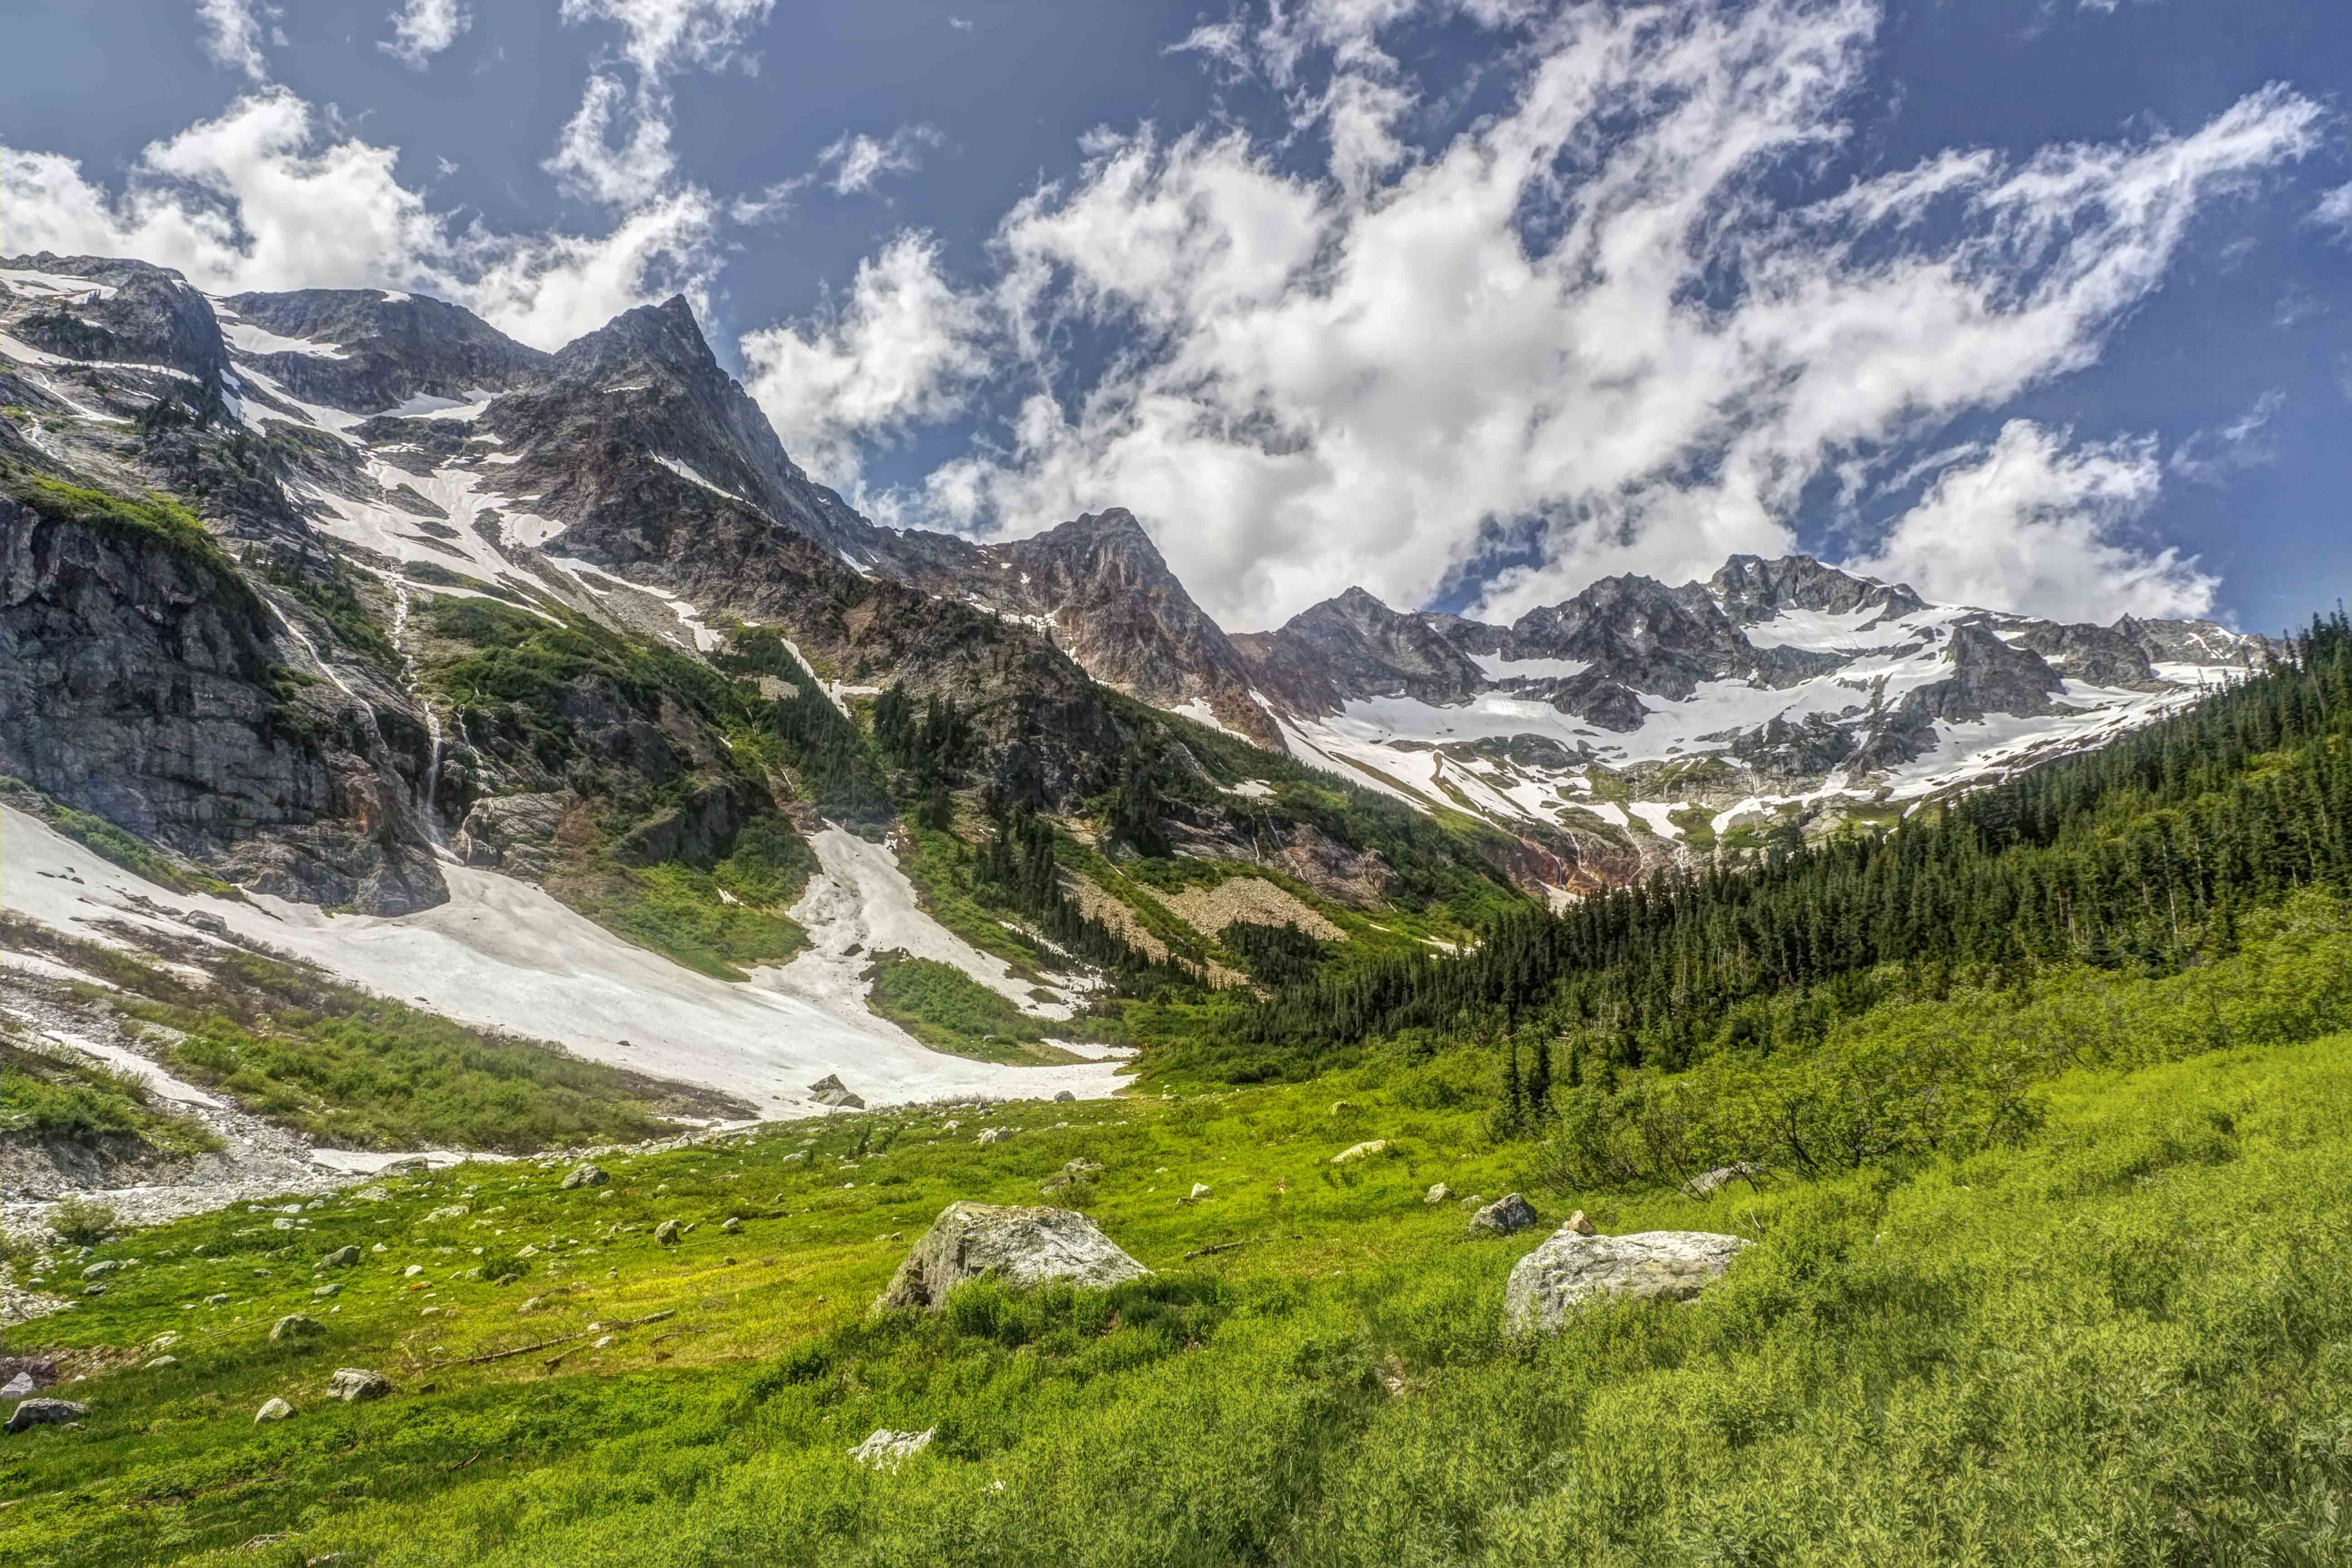 North Fork Meadows, North Cascades National park - Andy Porter Images